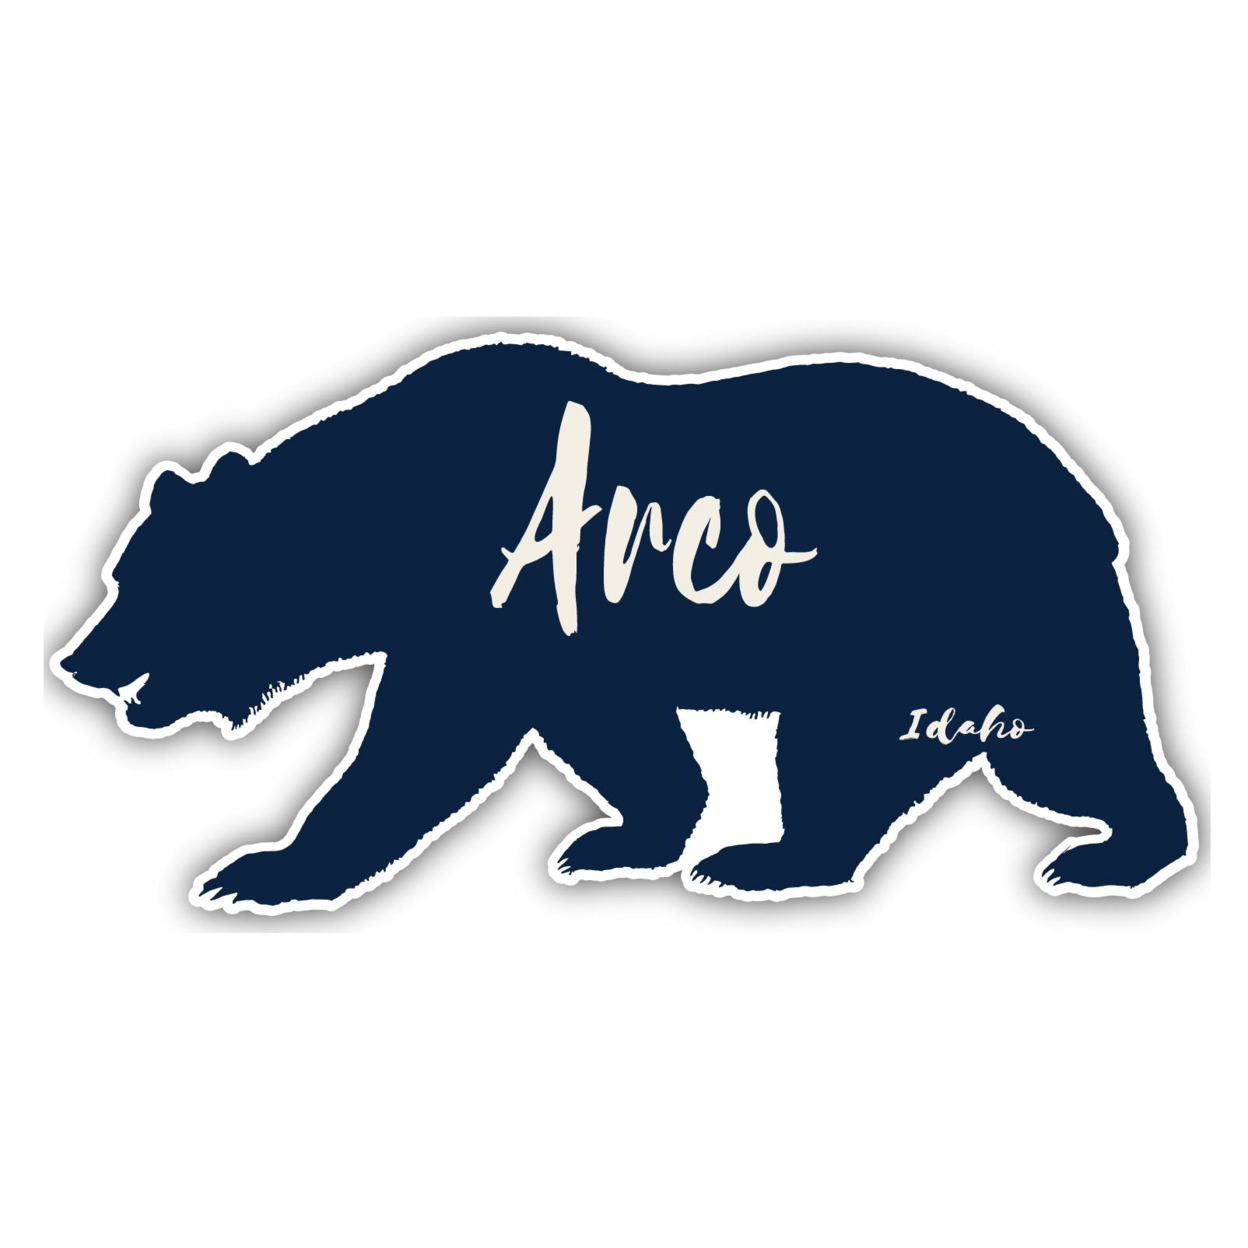 Arco Idaho Souvenir Decorative Stickers (Choose Theme And Size) - 4-Pack, 12-Inch, Great Outdoors